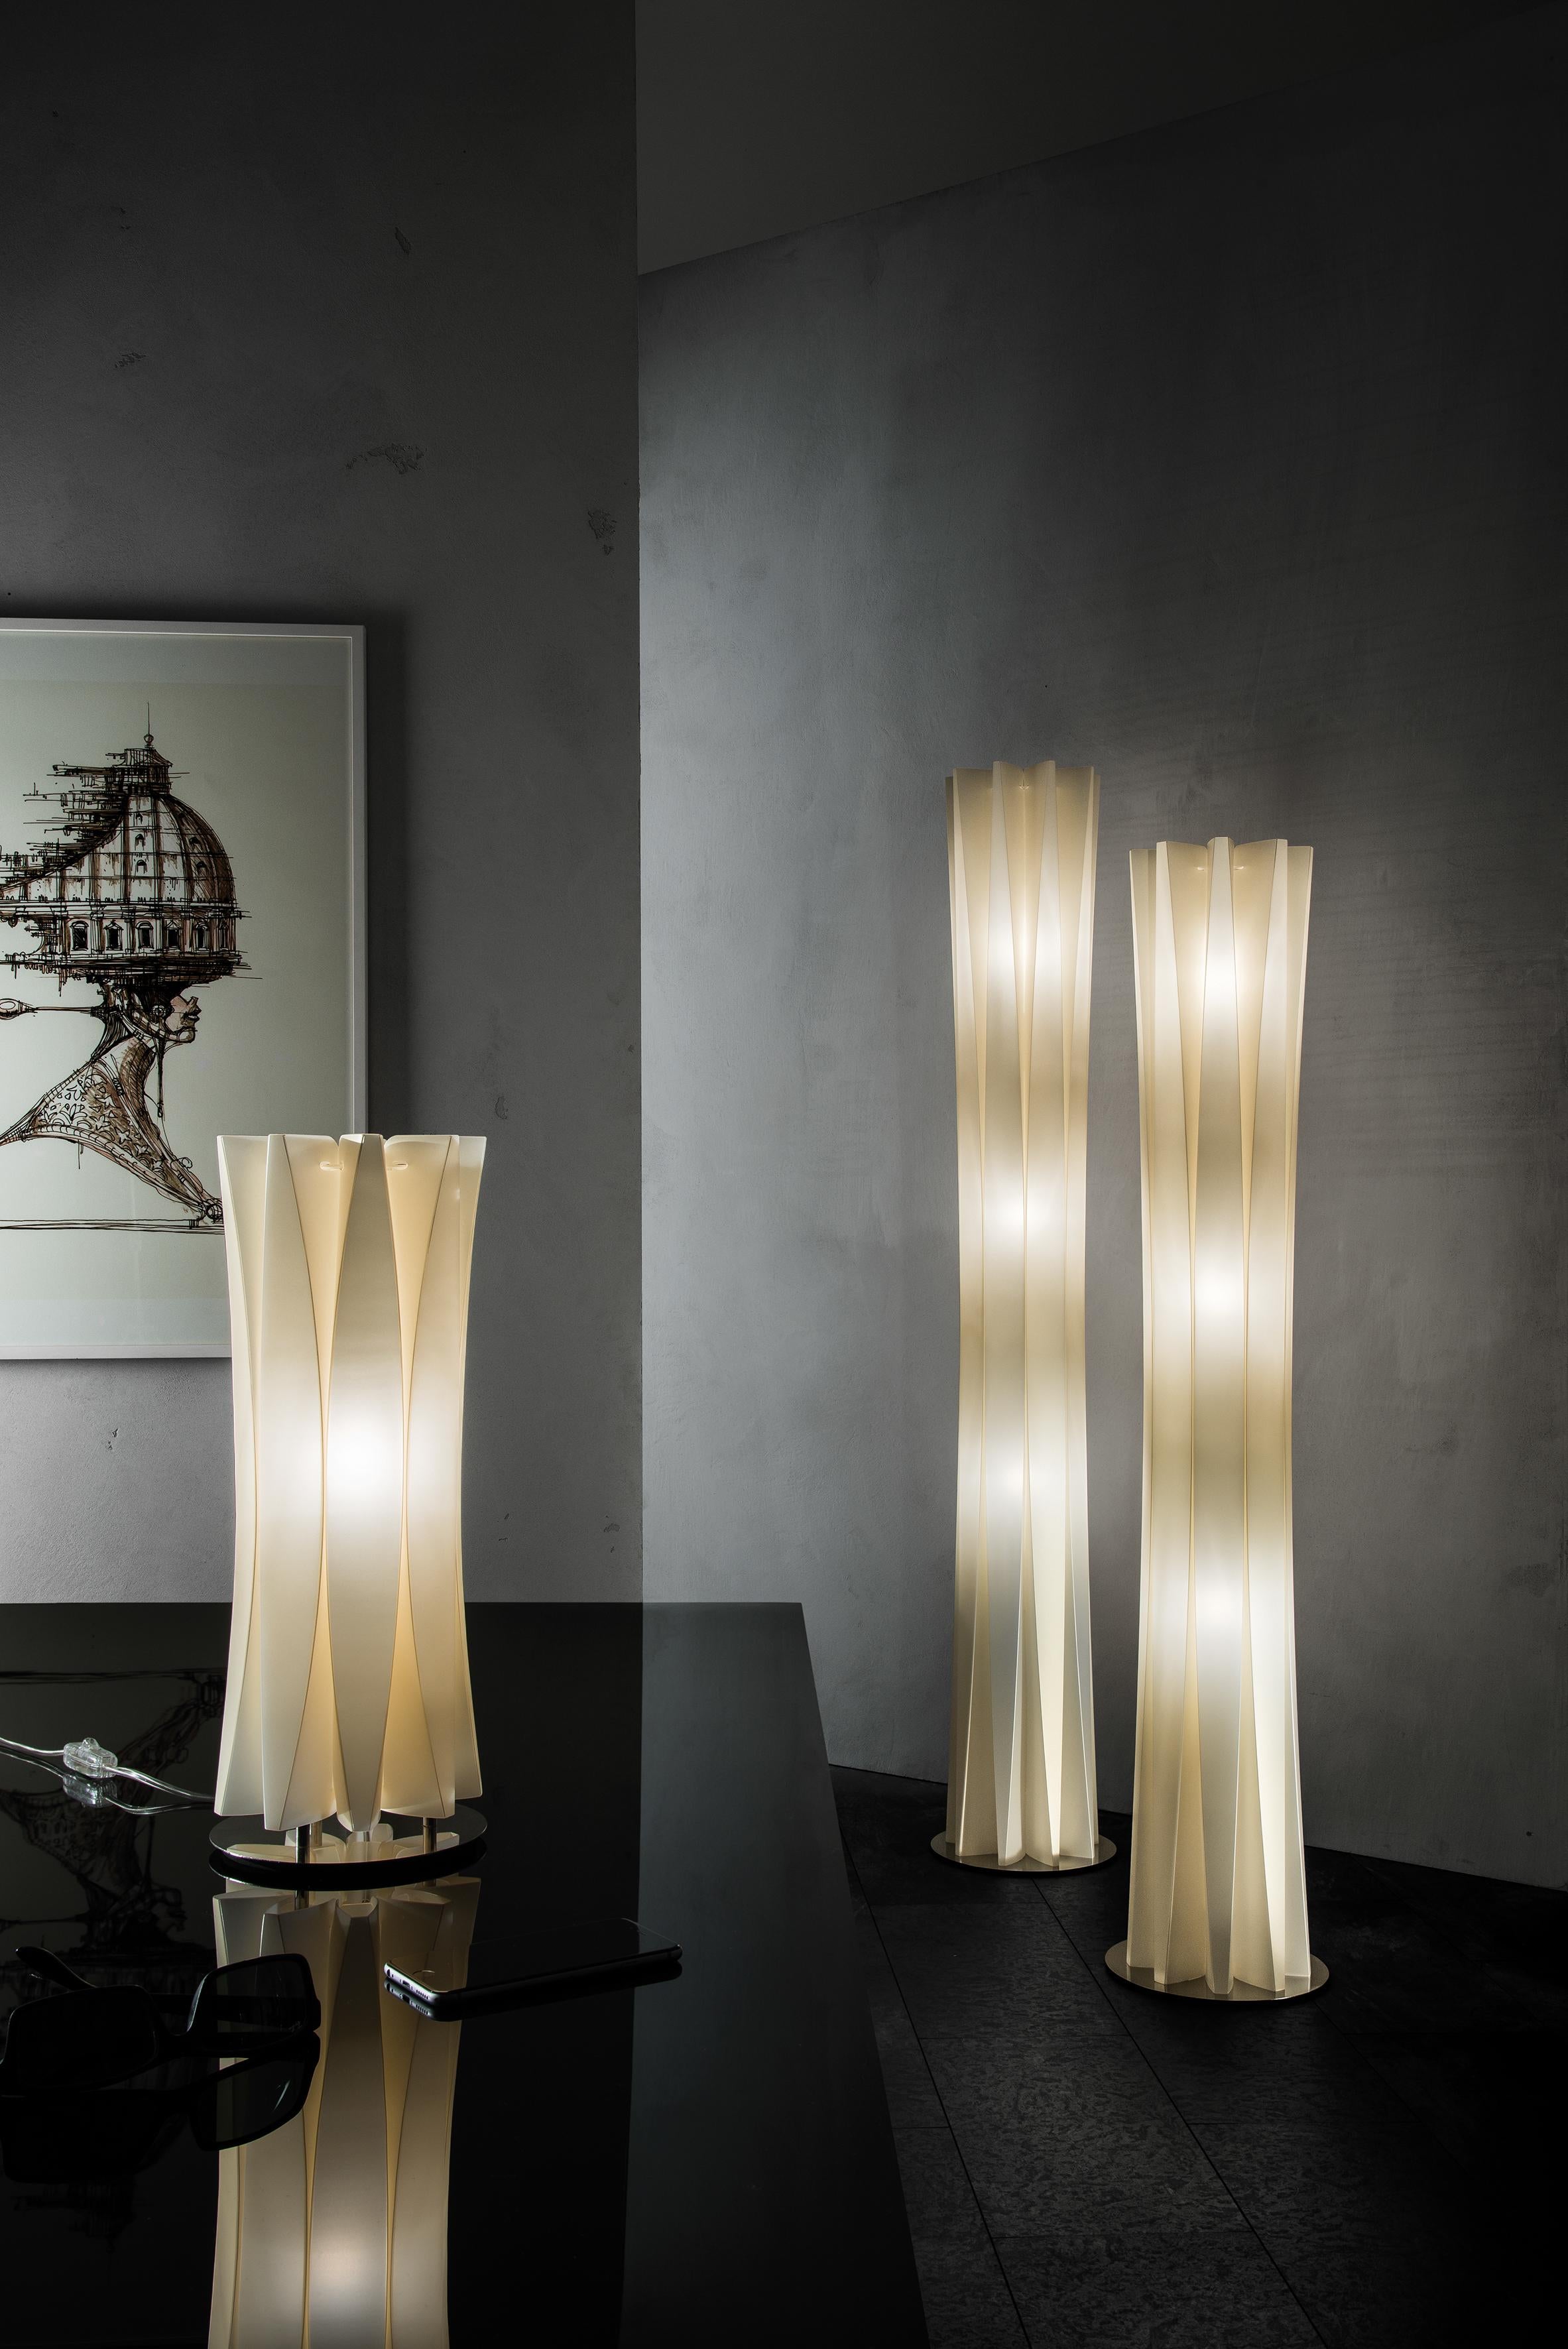 Slim and refined, Bach is statuary, with elegant yet rigorous curves, bringing fluid, linear movement and illumination to any interior. Bach is available in various heights and sizes, that when grouped together, create welcoming nooks filled with